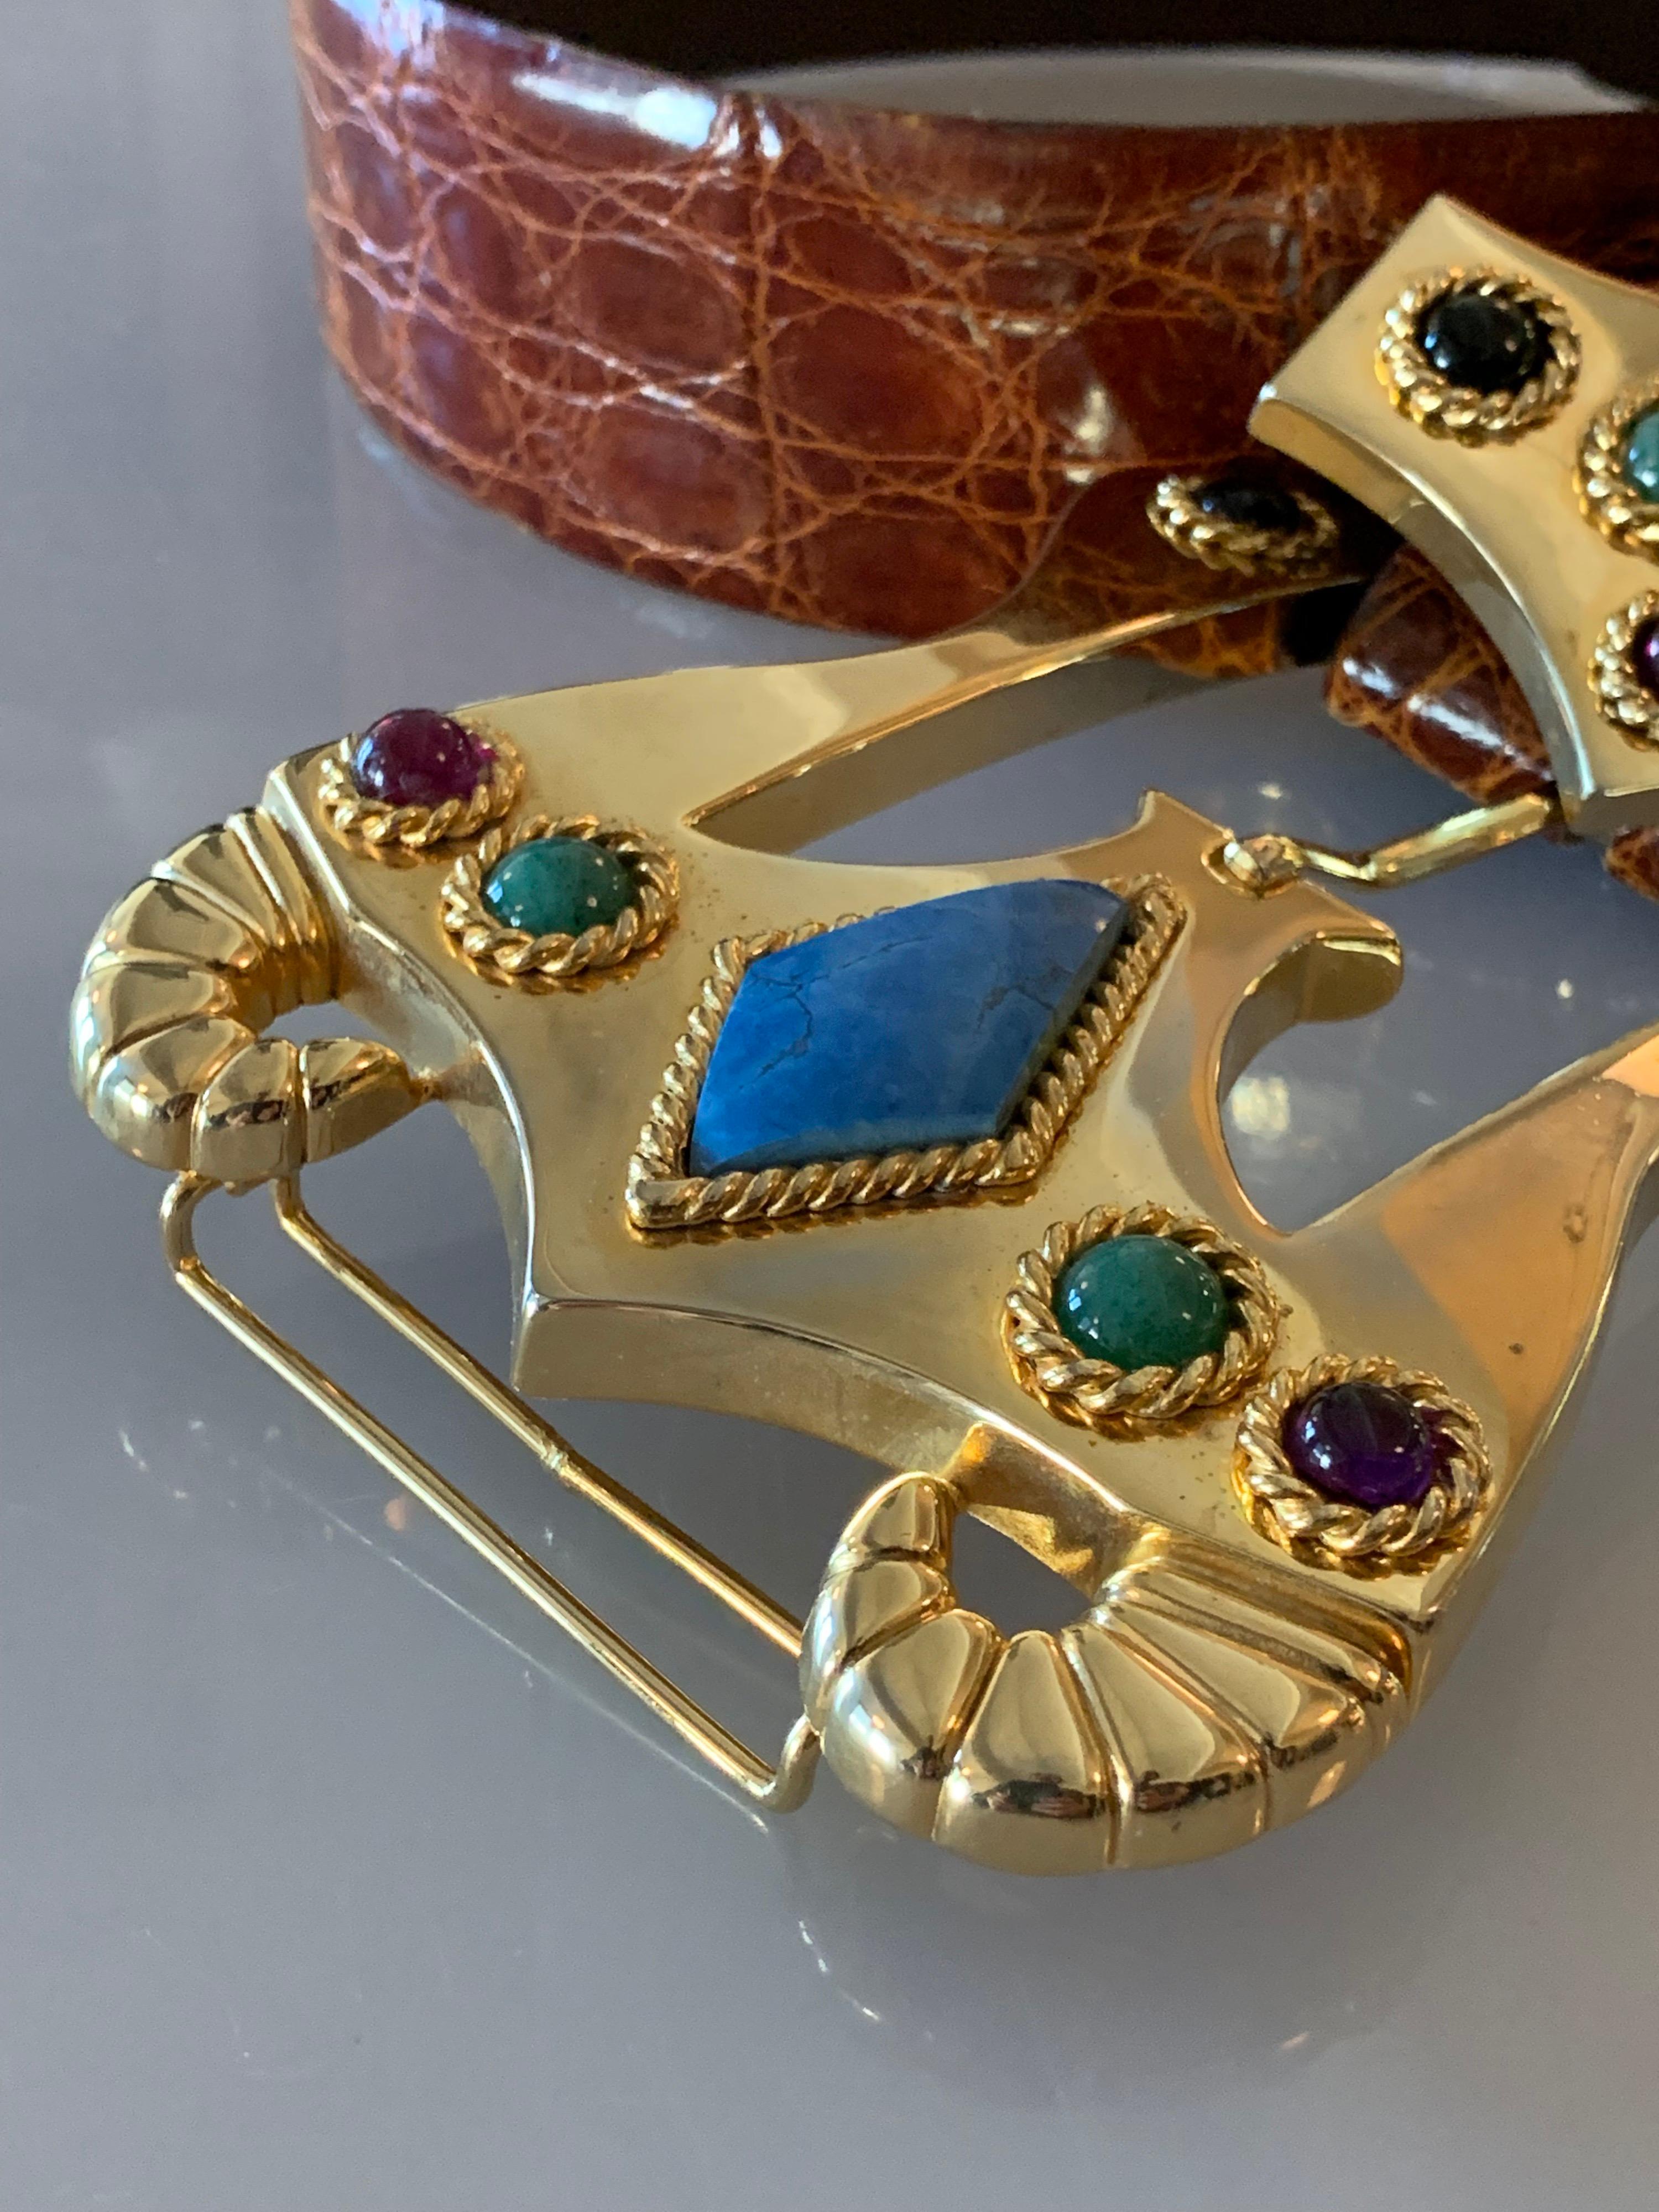 1980s Caryn Suzann Genuine Alligator Belt Featuring A Massive Etruscan-Inspired Gold Tone Buckle With Semi-Precious Stones.